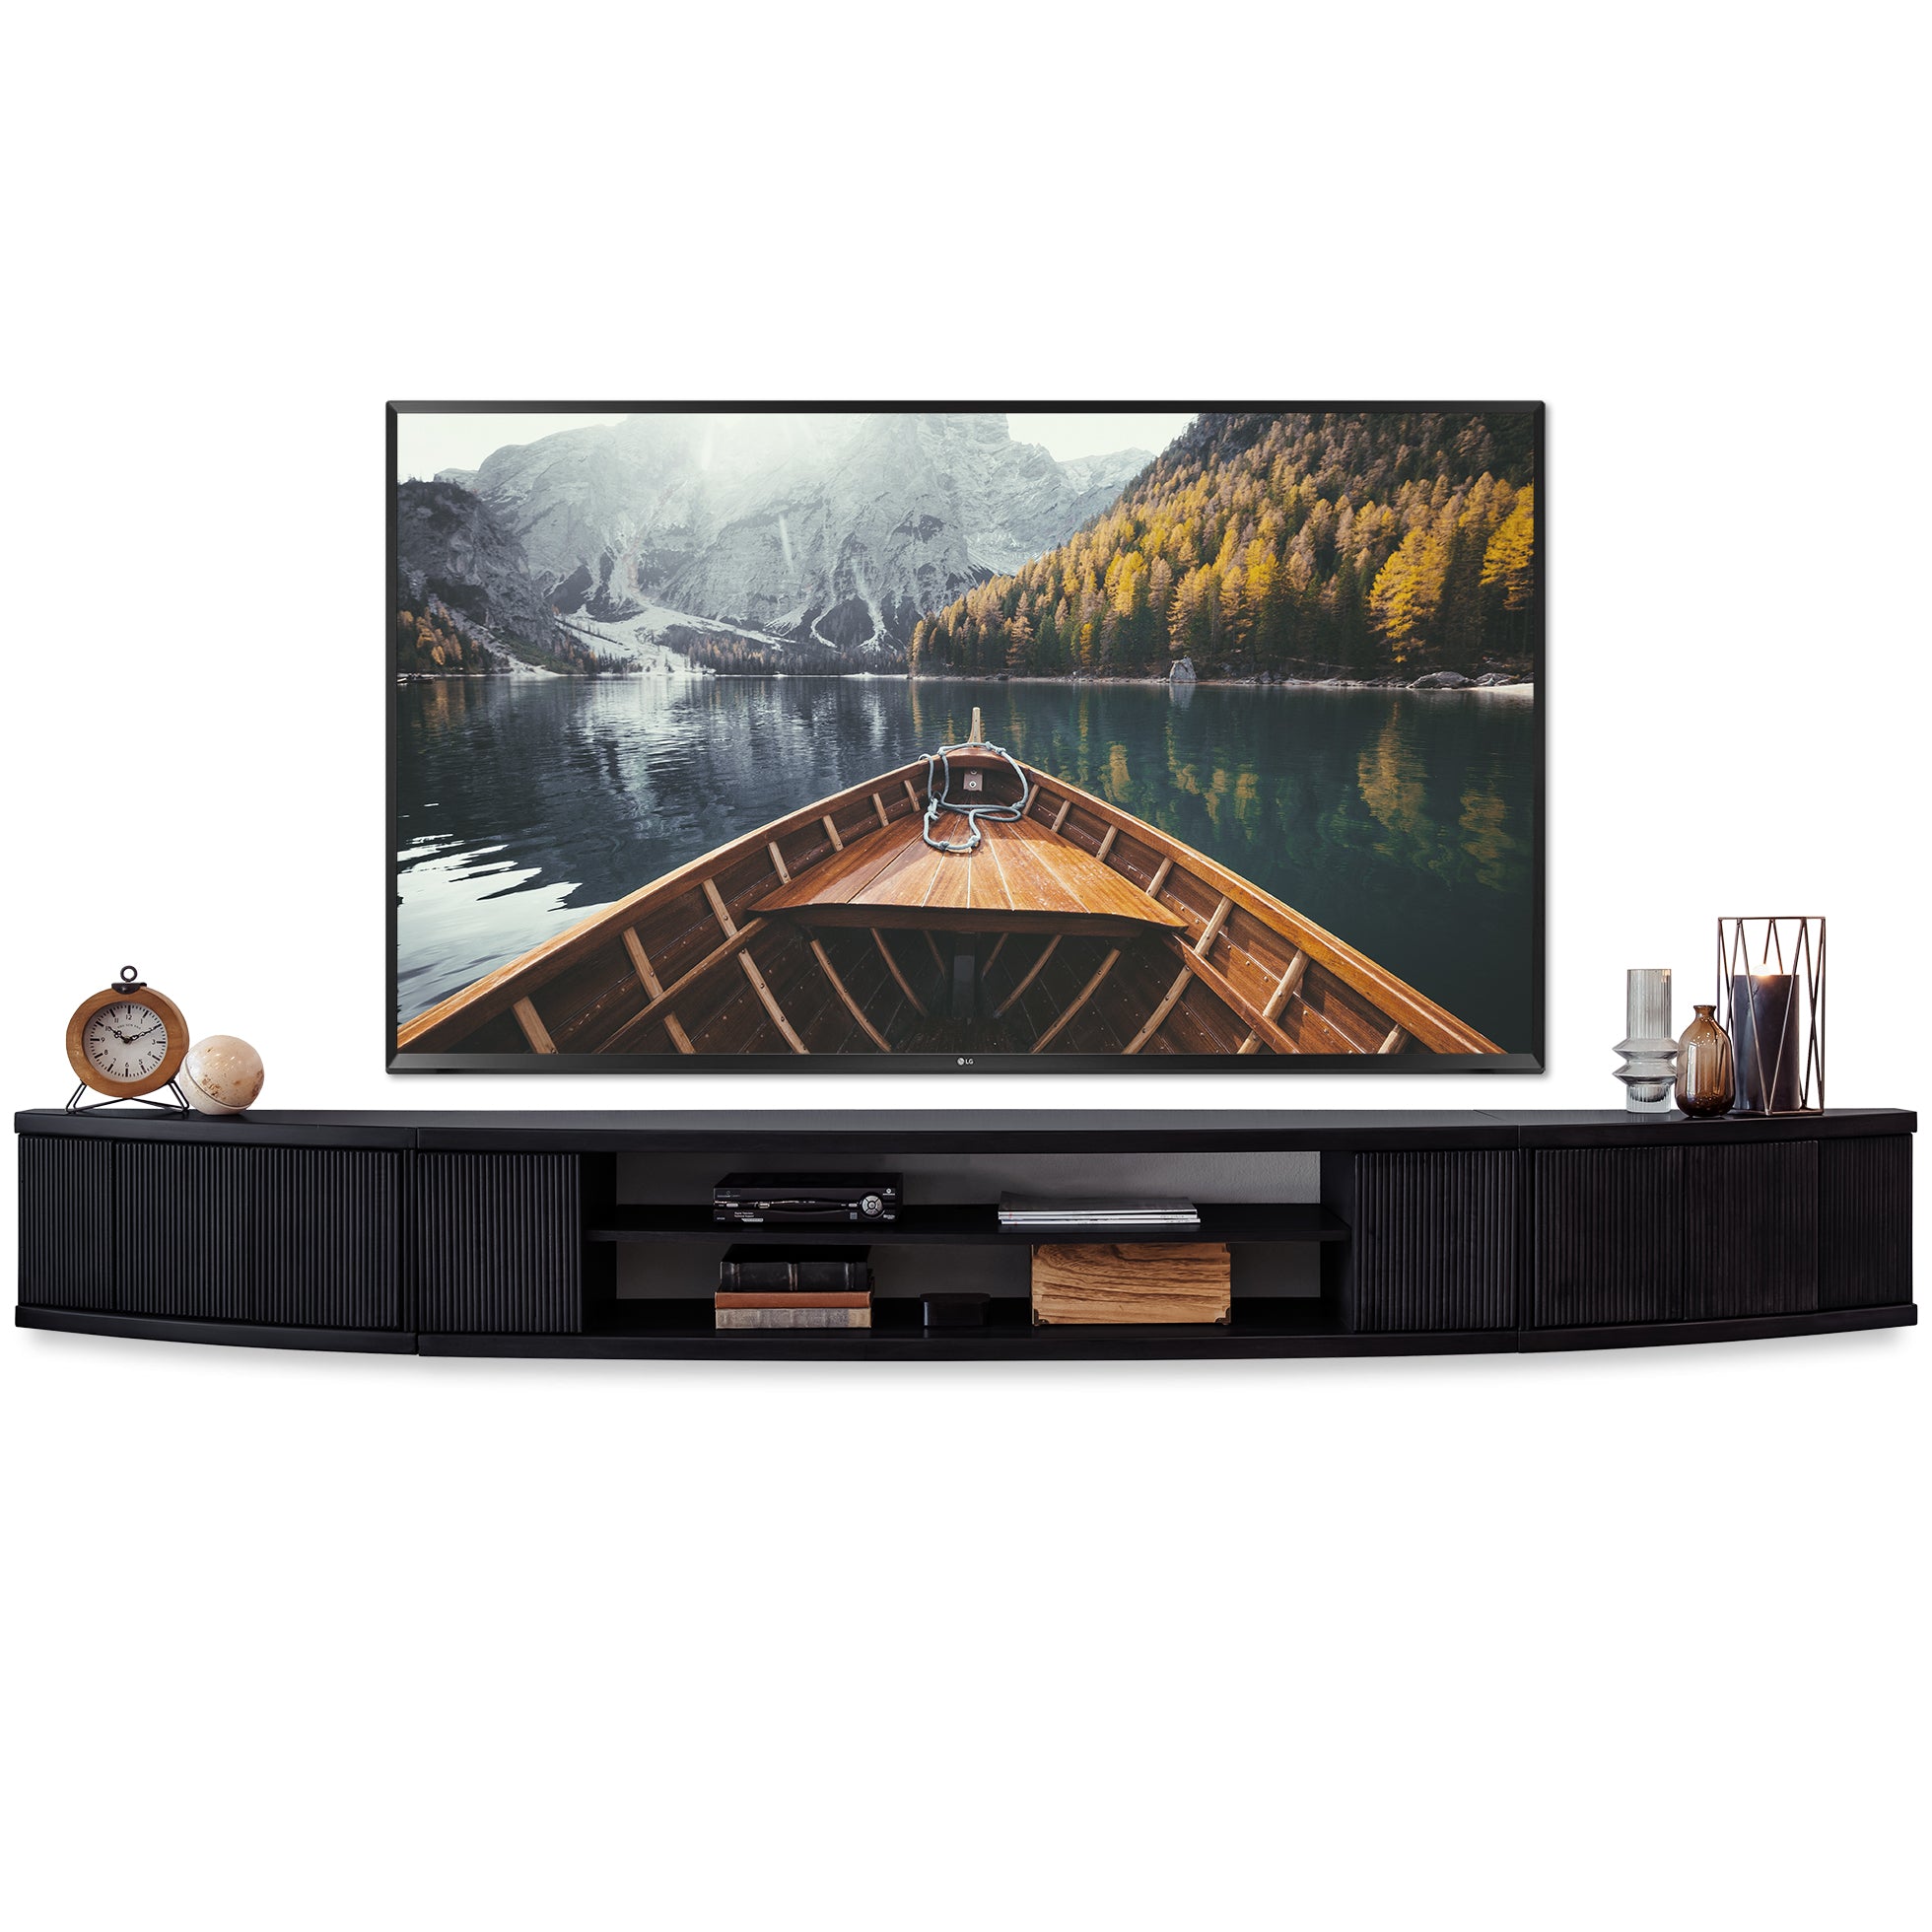 Floating TV Stand Wall Mount Entertainment Center Console - Arc - Black